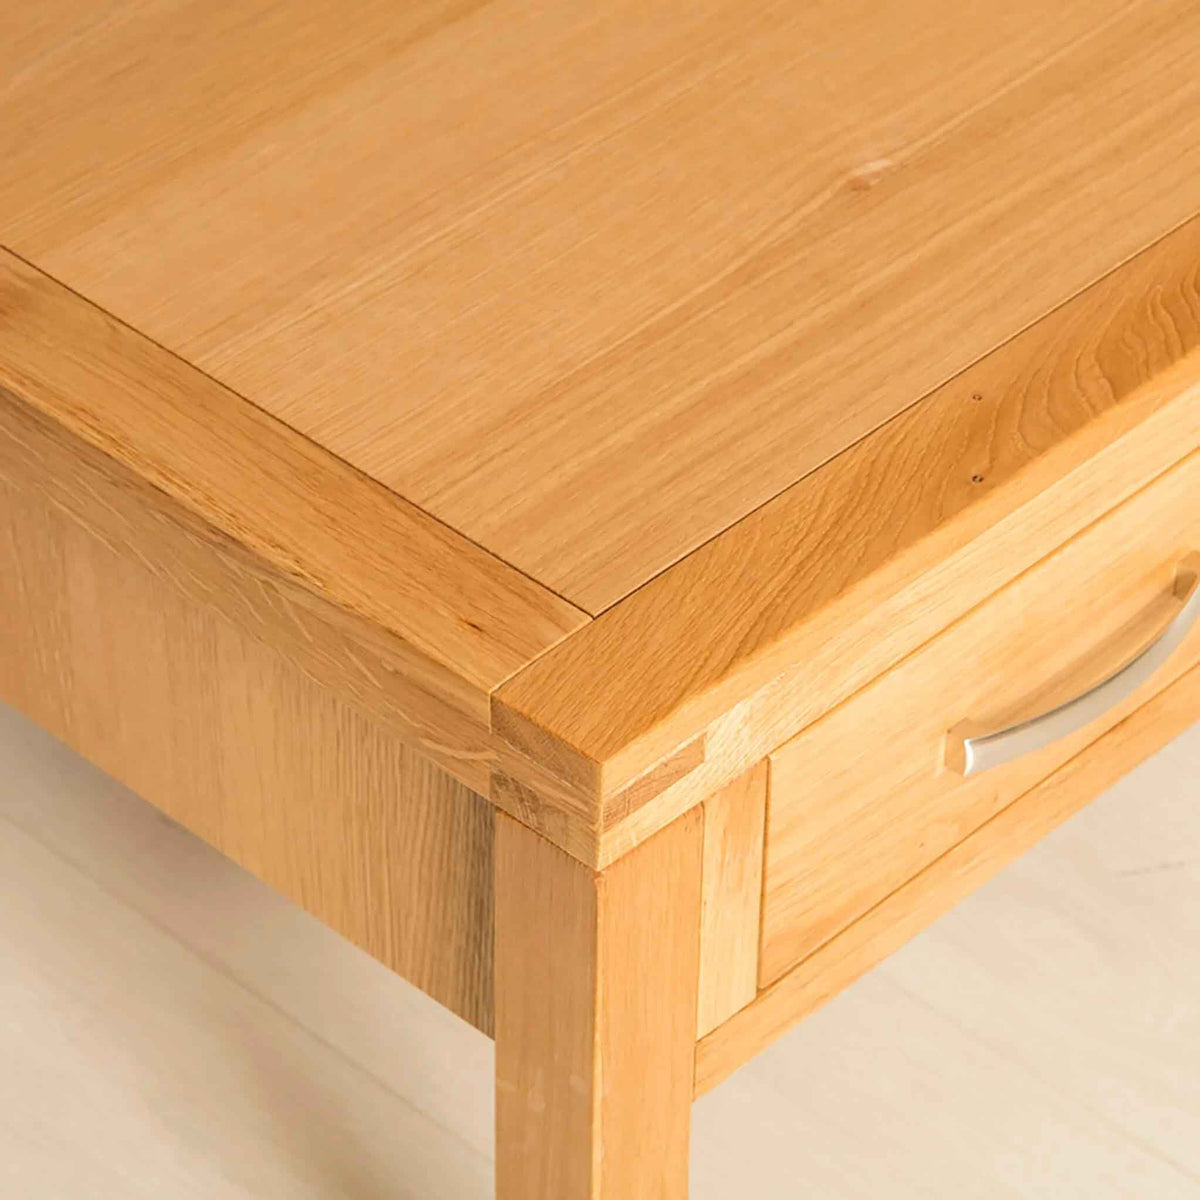 Topside corner view of the Abbey Light Oak Coffee Table with drawer from Roseland Furniture